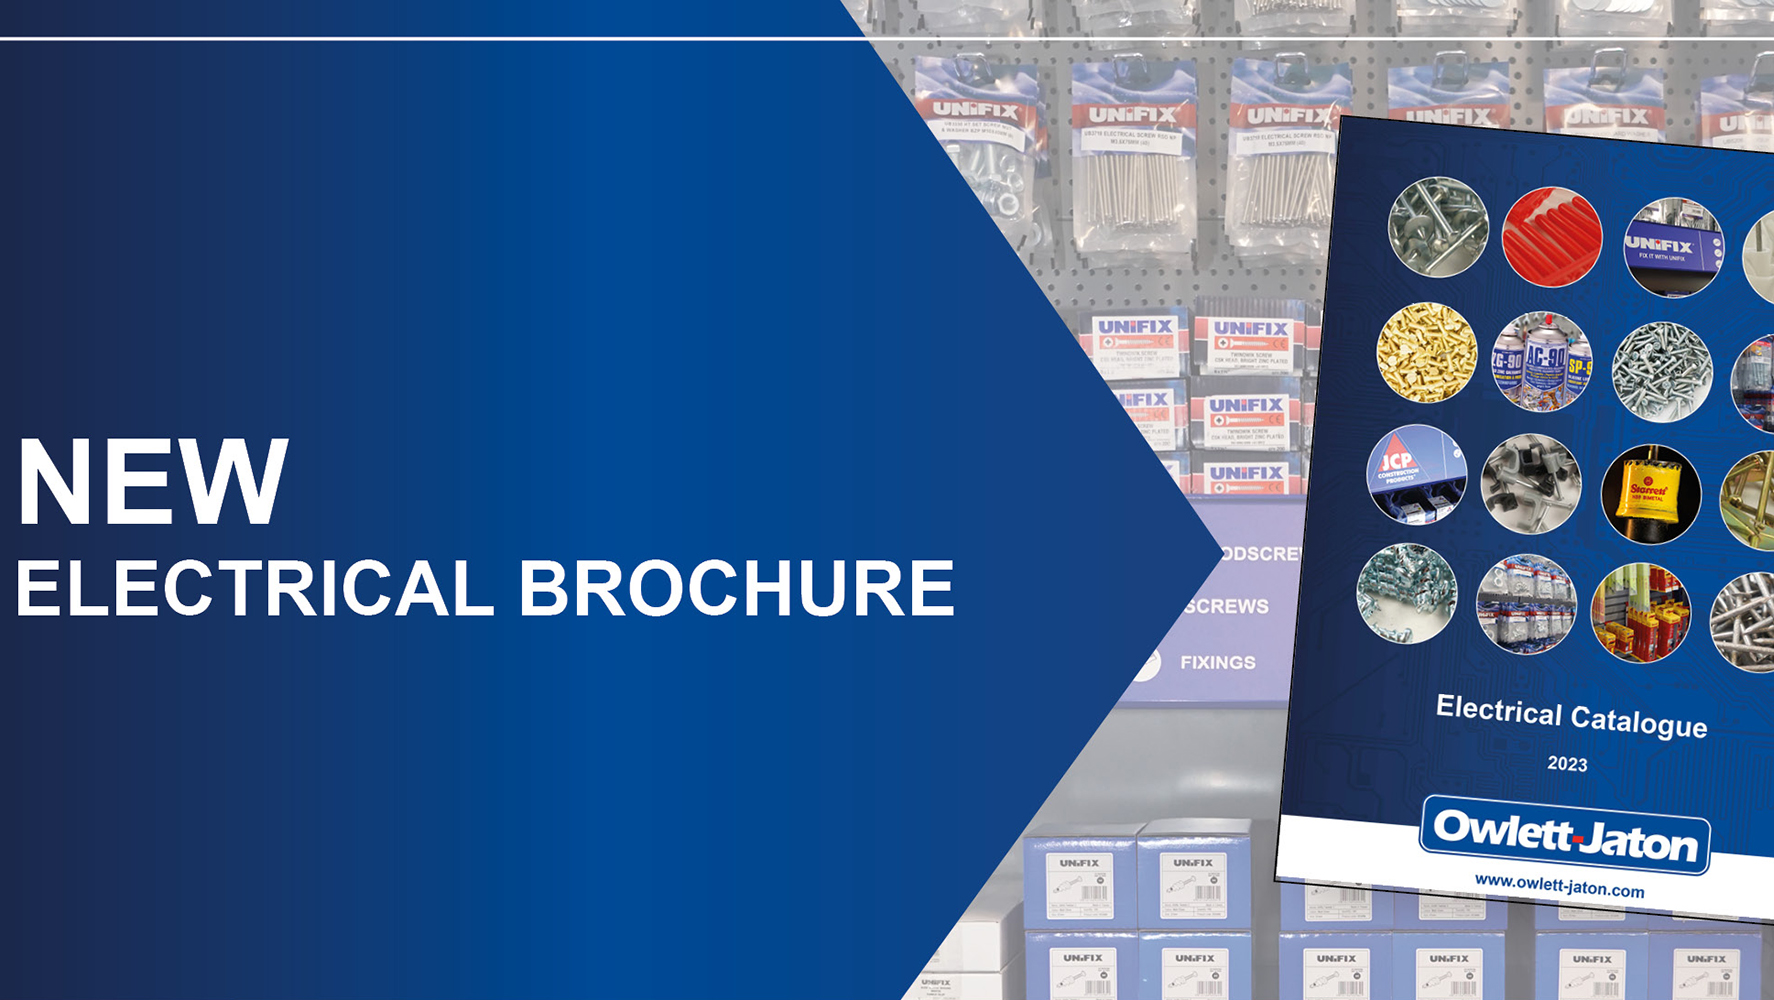 New Electrical Brochure Now Available 